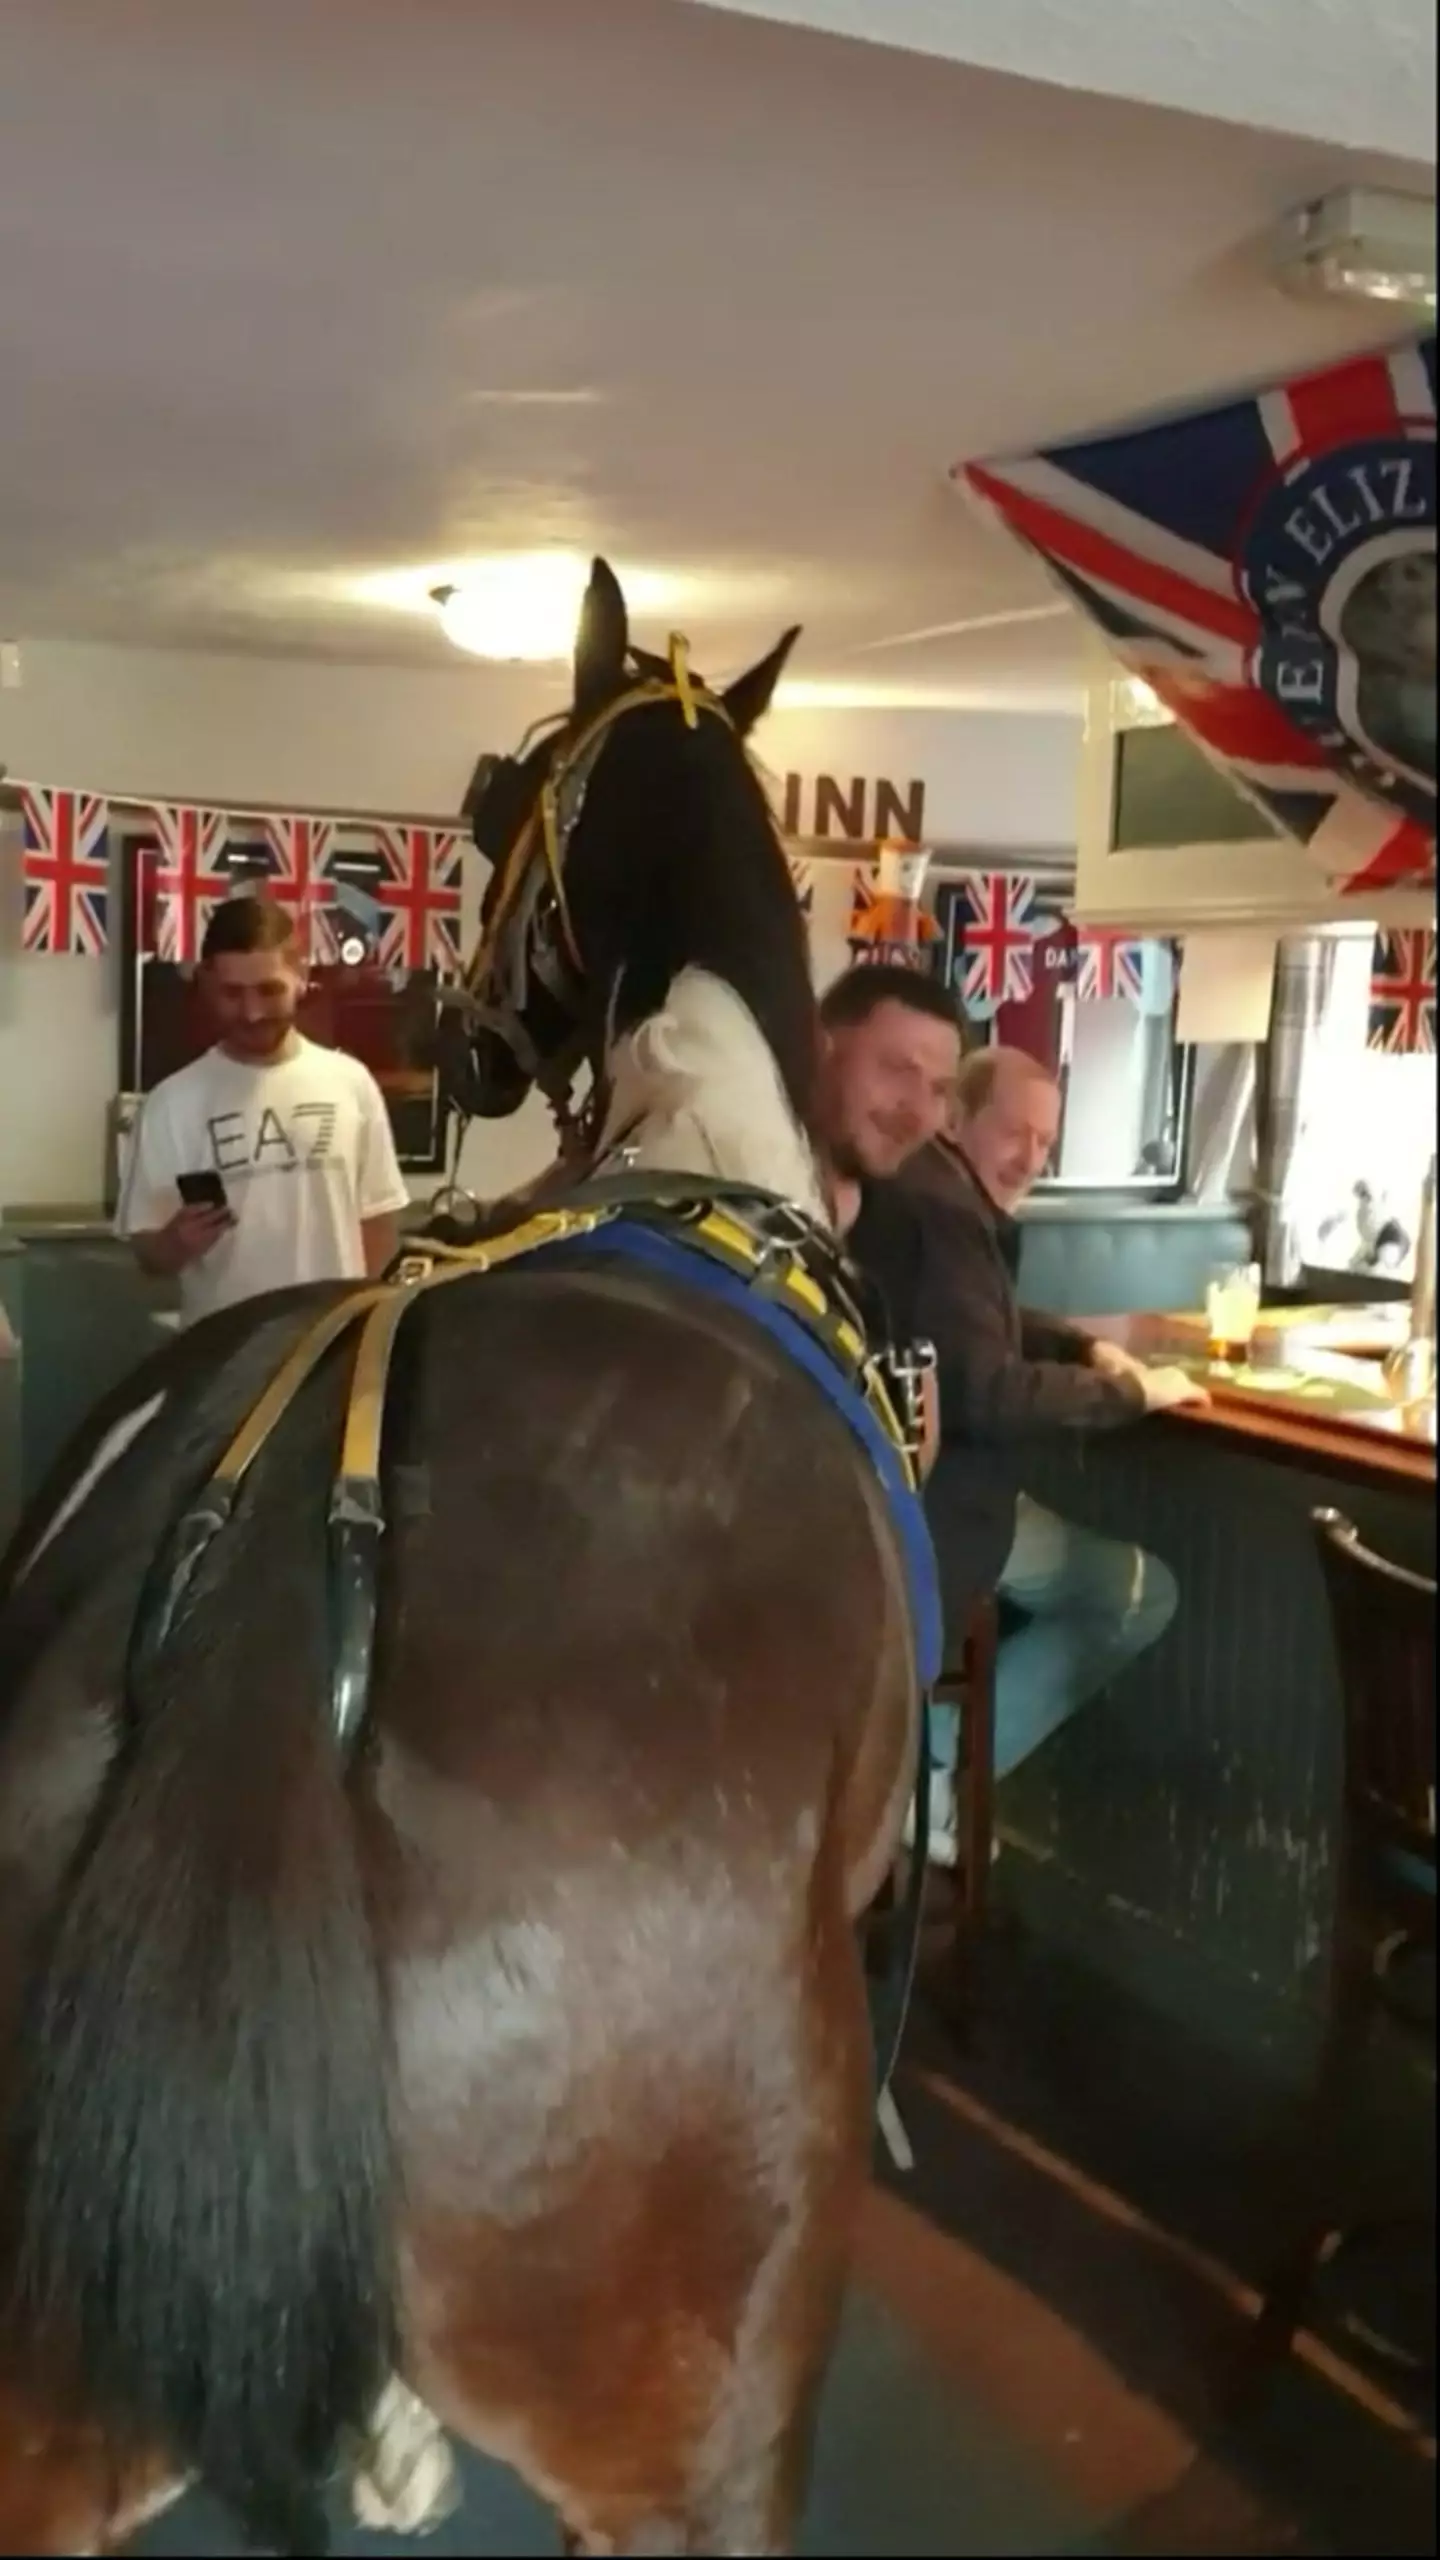 "Not every day you see a horse come into a pub!"